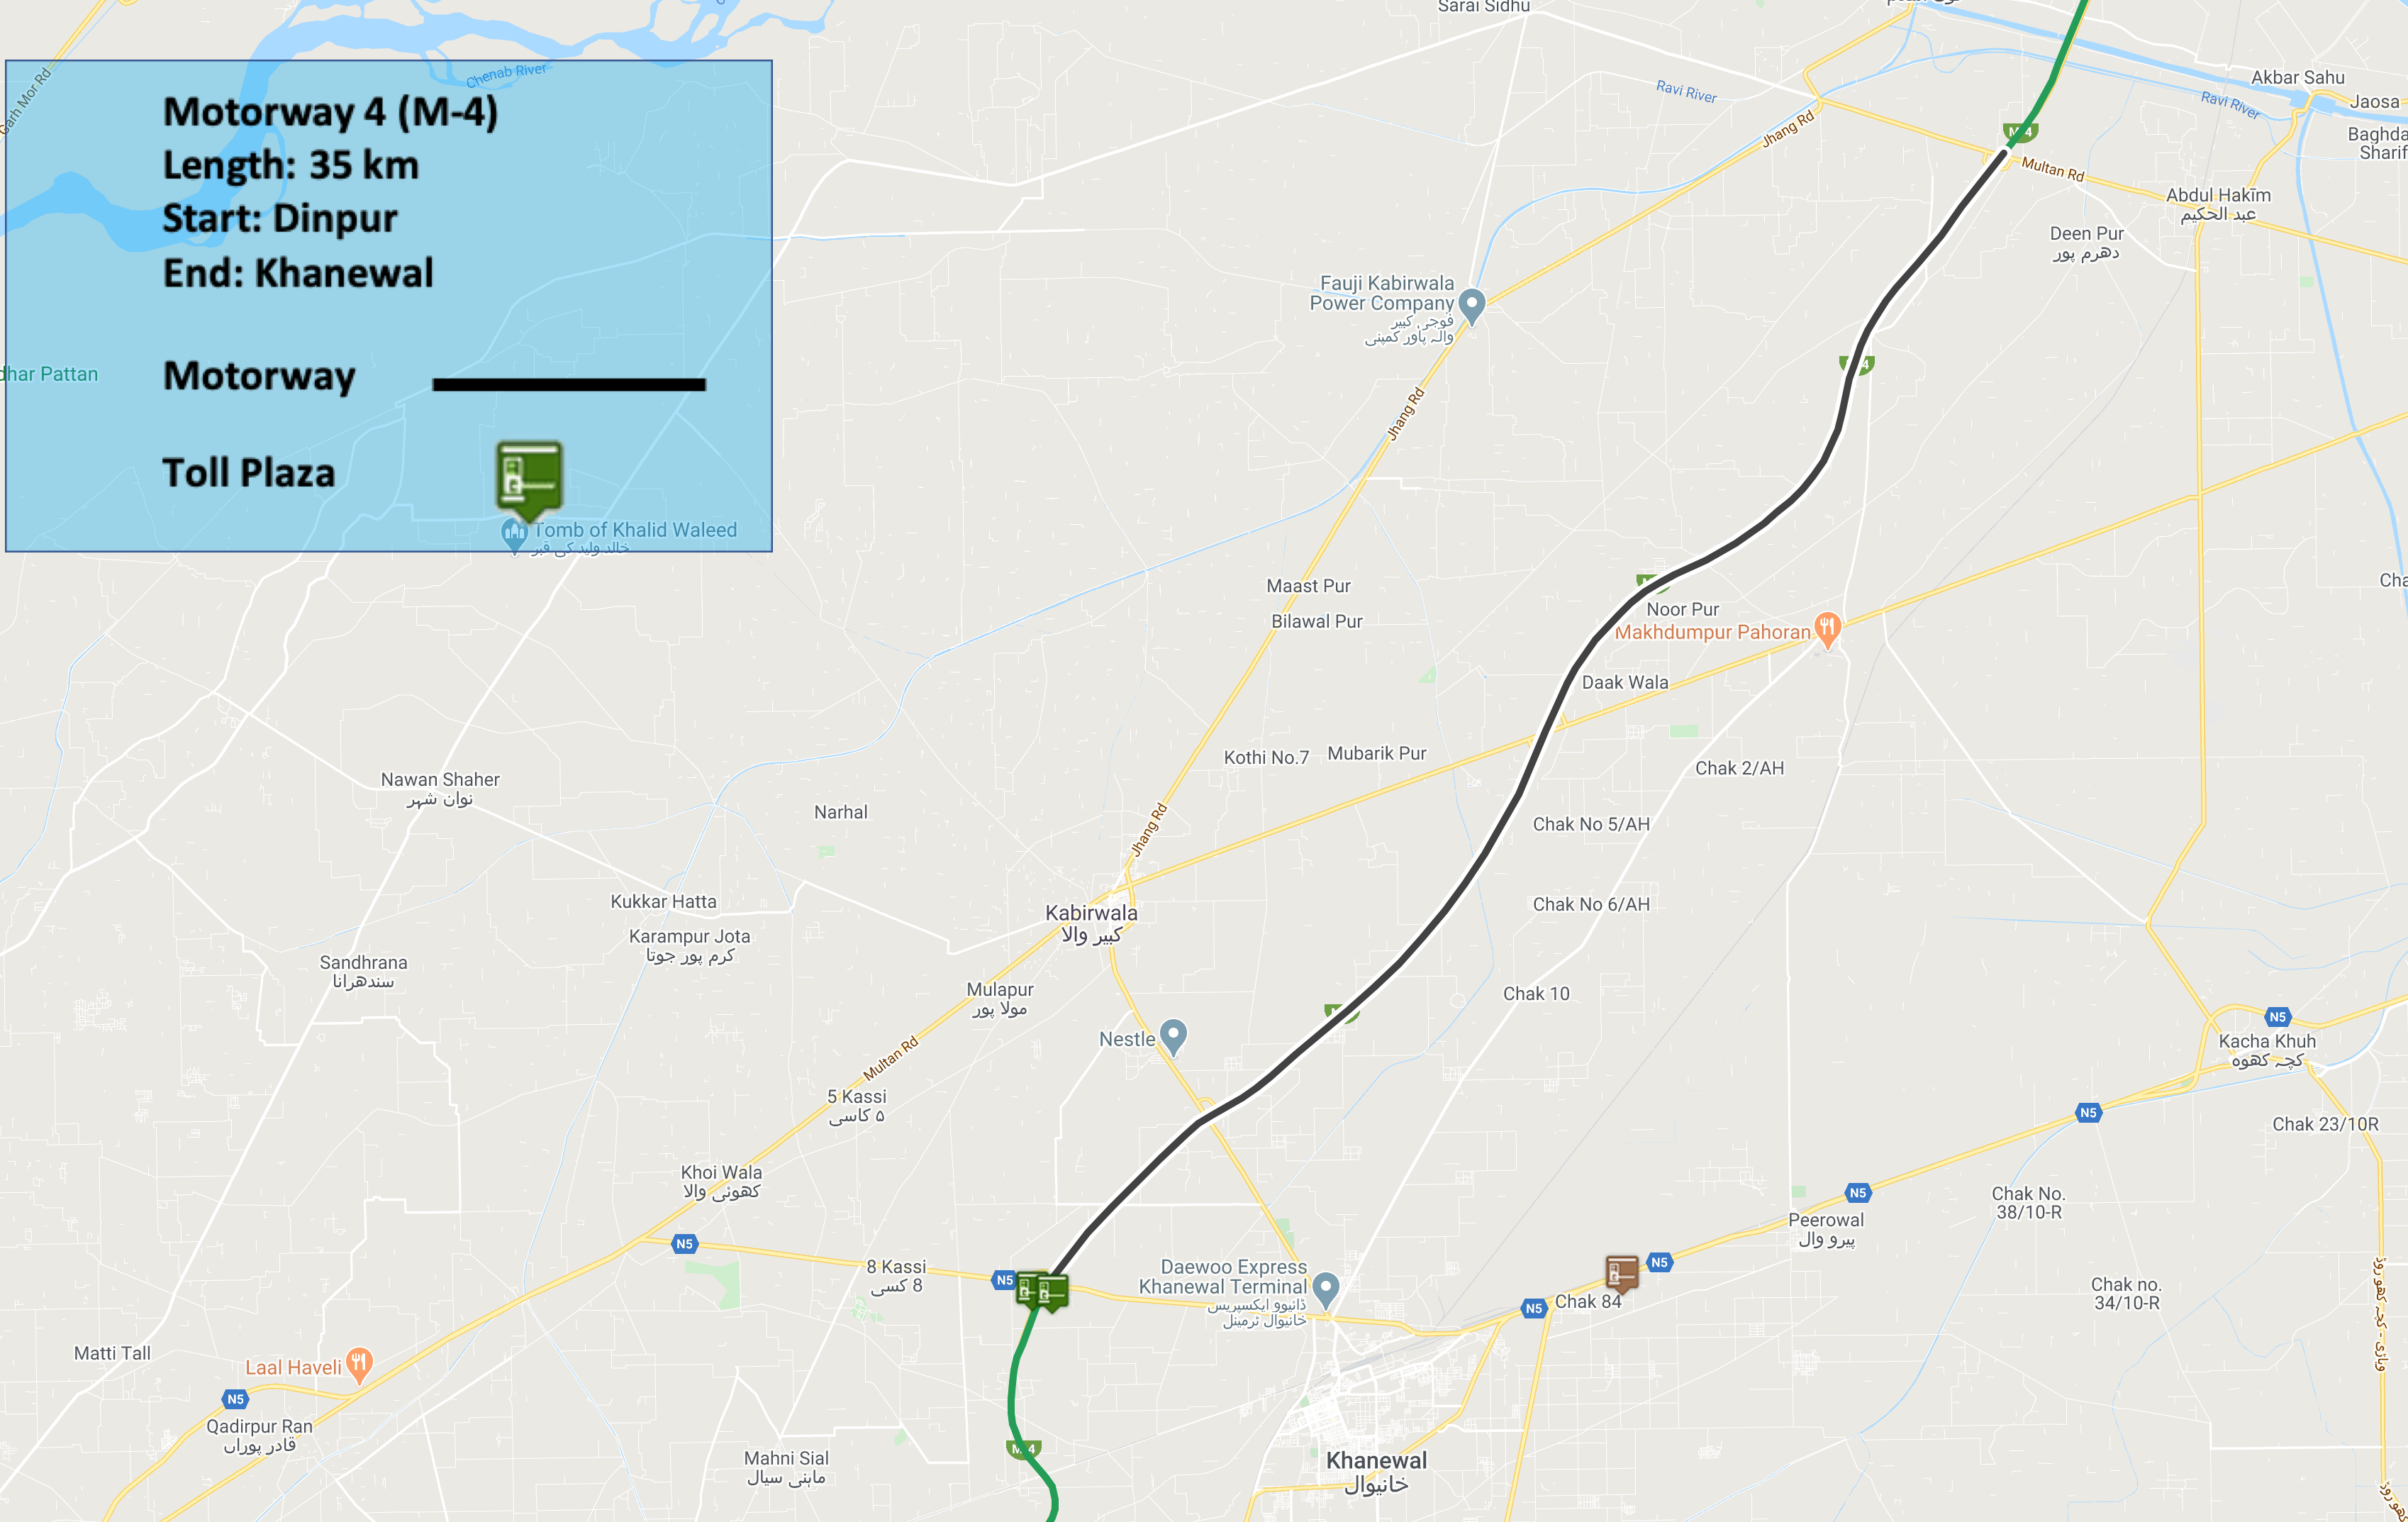 Dinpur-Khanewal Section (M-4)